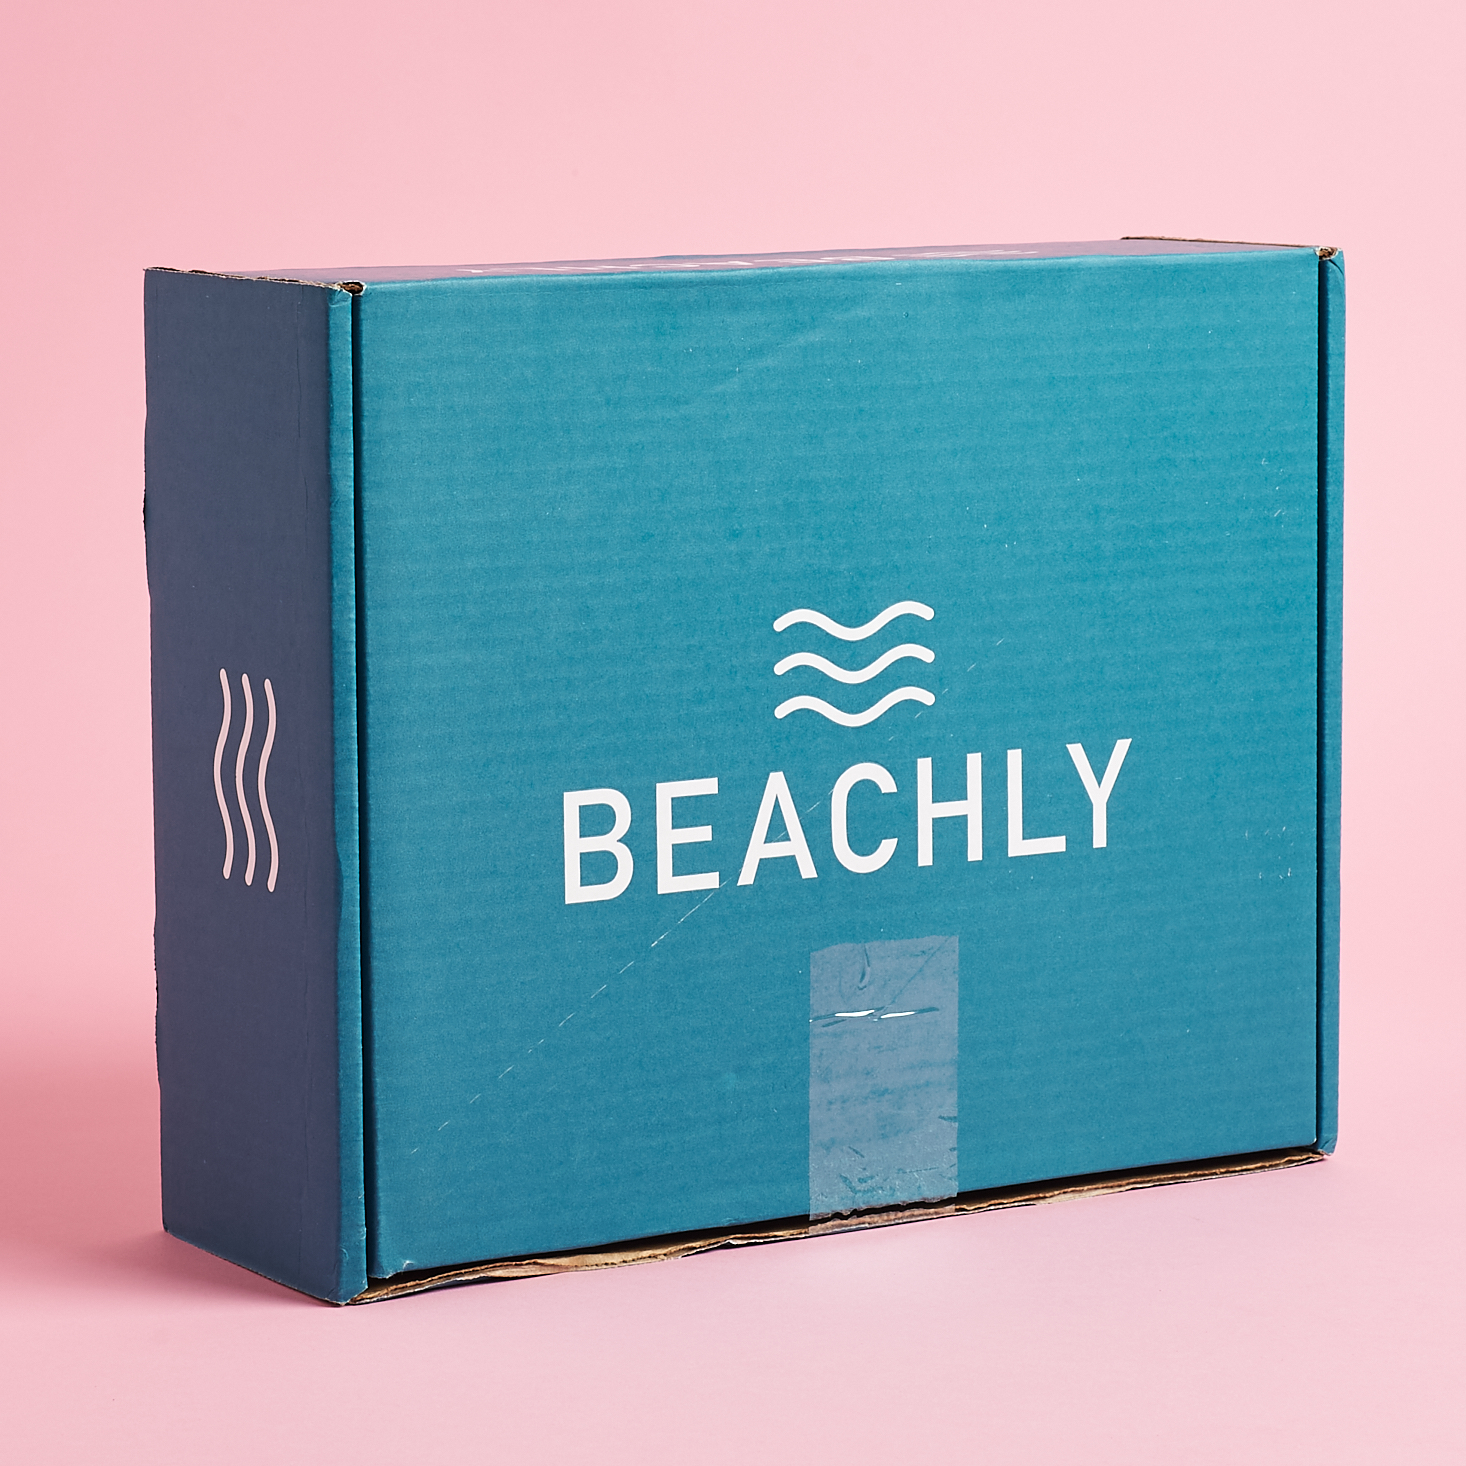 Beachly Men’s Lifestyle Box Review + Coupon – Winter 2020